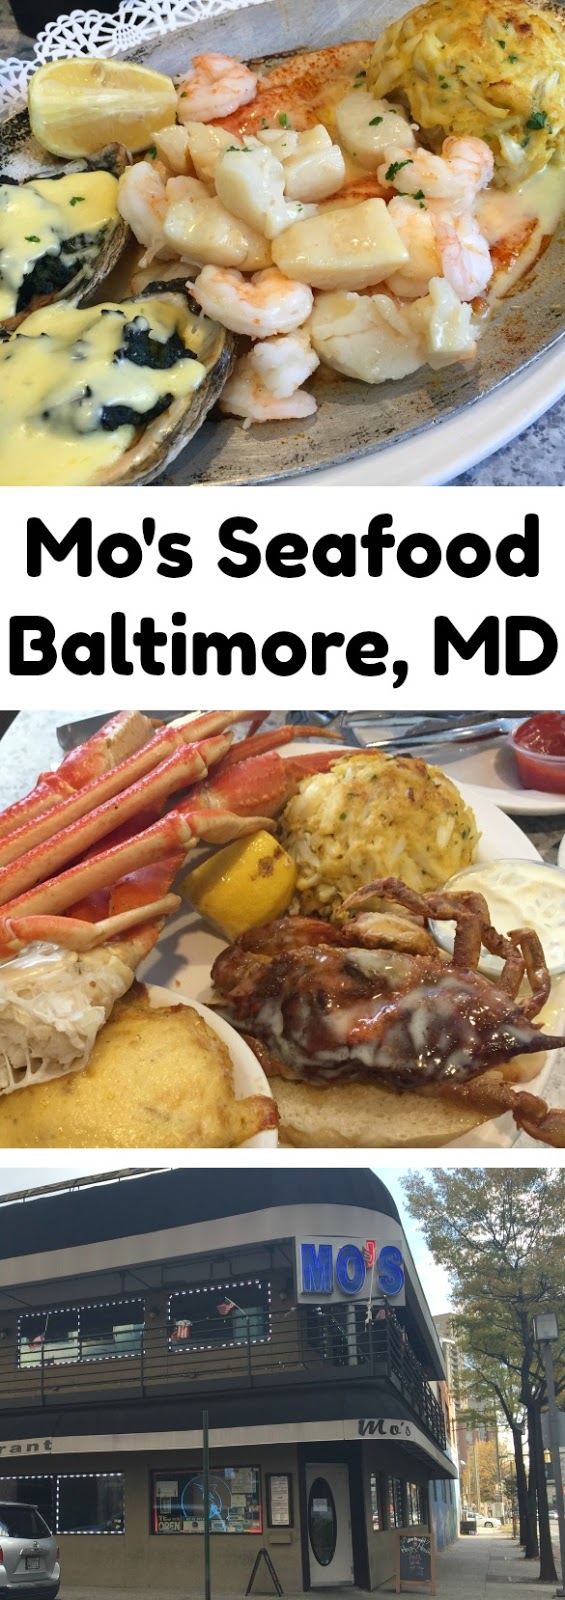 Mo's Seafood in Inner Harbor Baltimore, Maryland. A delicious seafood restaurant option located in the Inner Harbor area! Great service and amazing quality seafood options! A must try in the Baltimore, Maryland area if you're traveling!